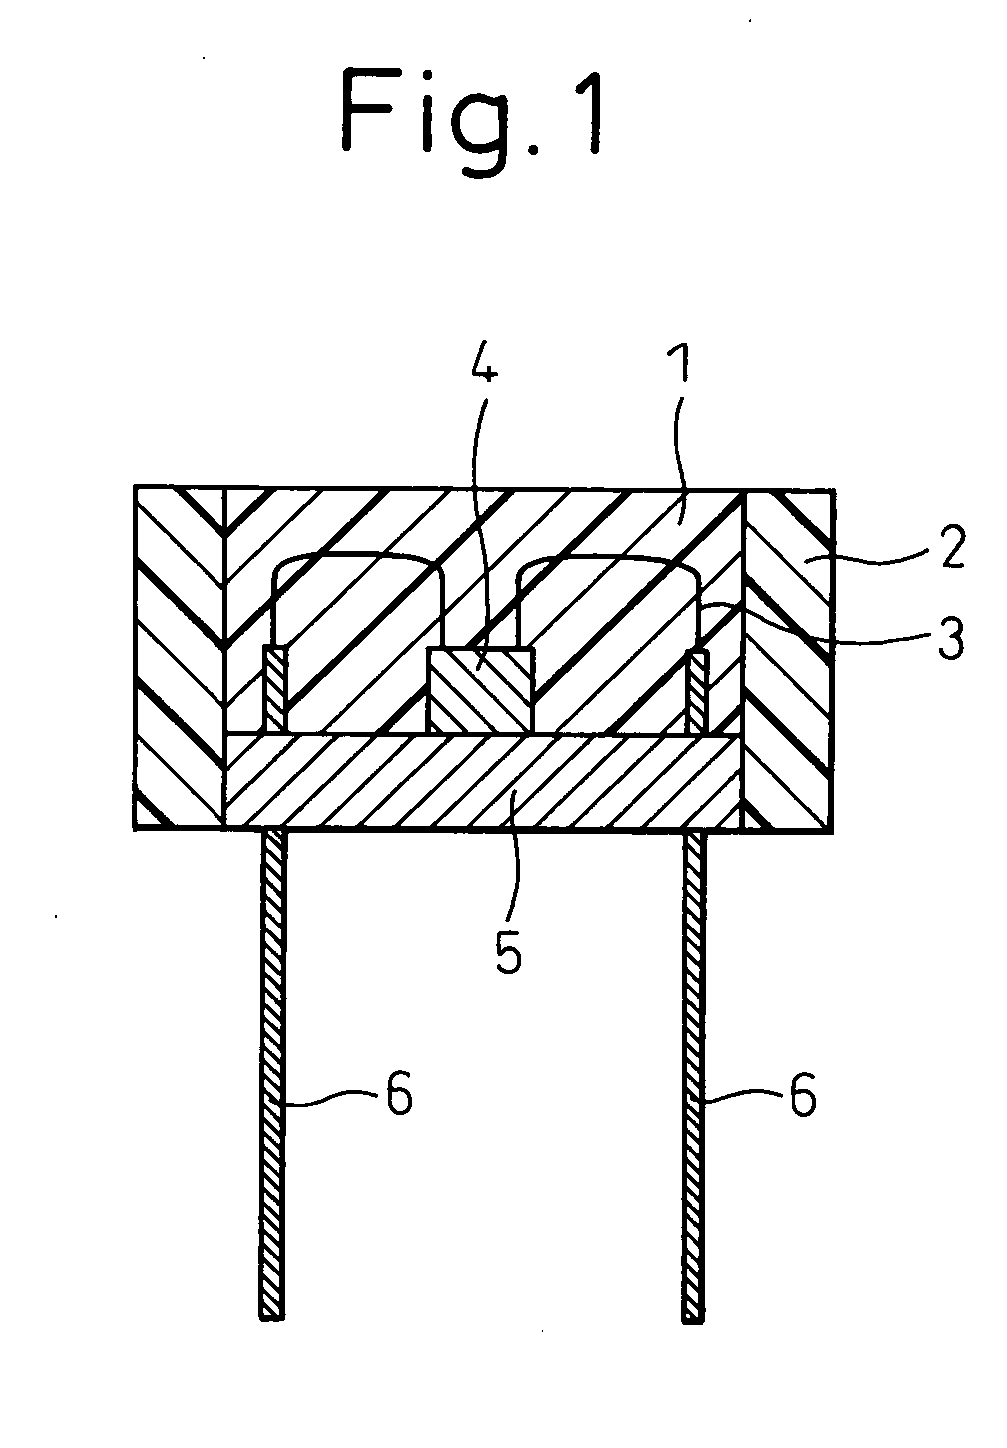 Sialon-based phosphor and its production method